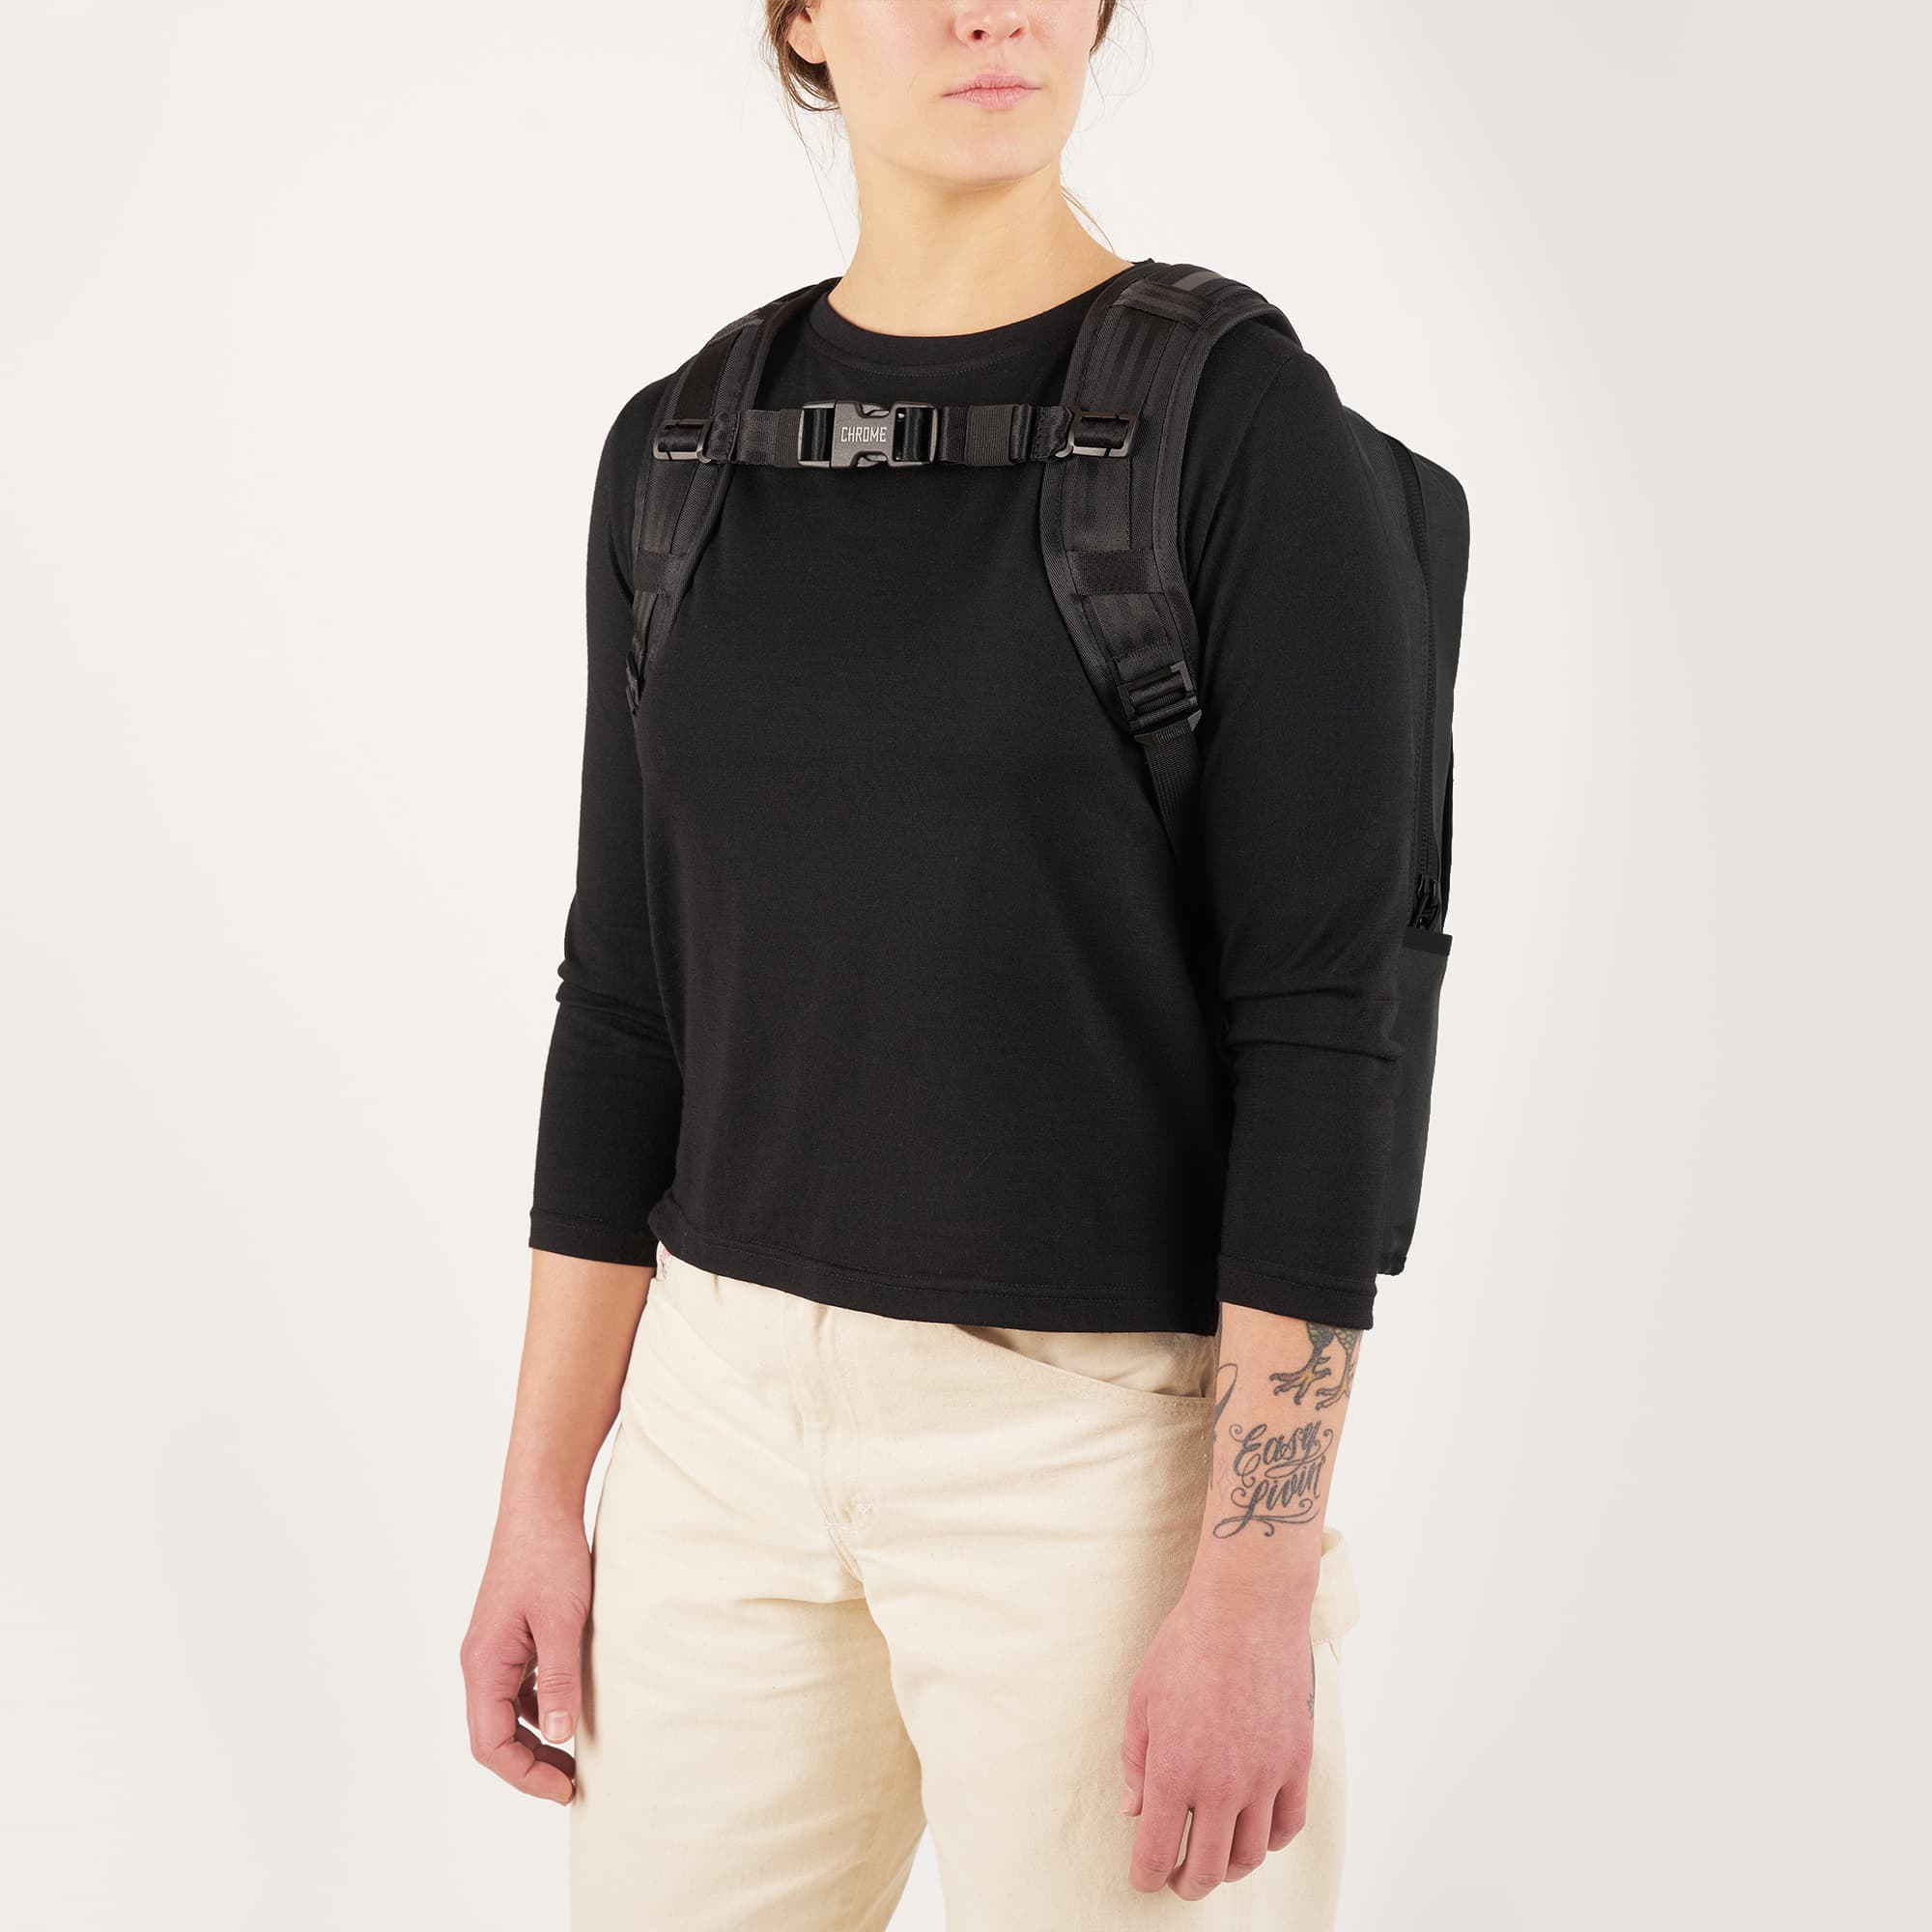 Hondo Daypack in black worn by a woman front view